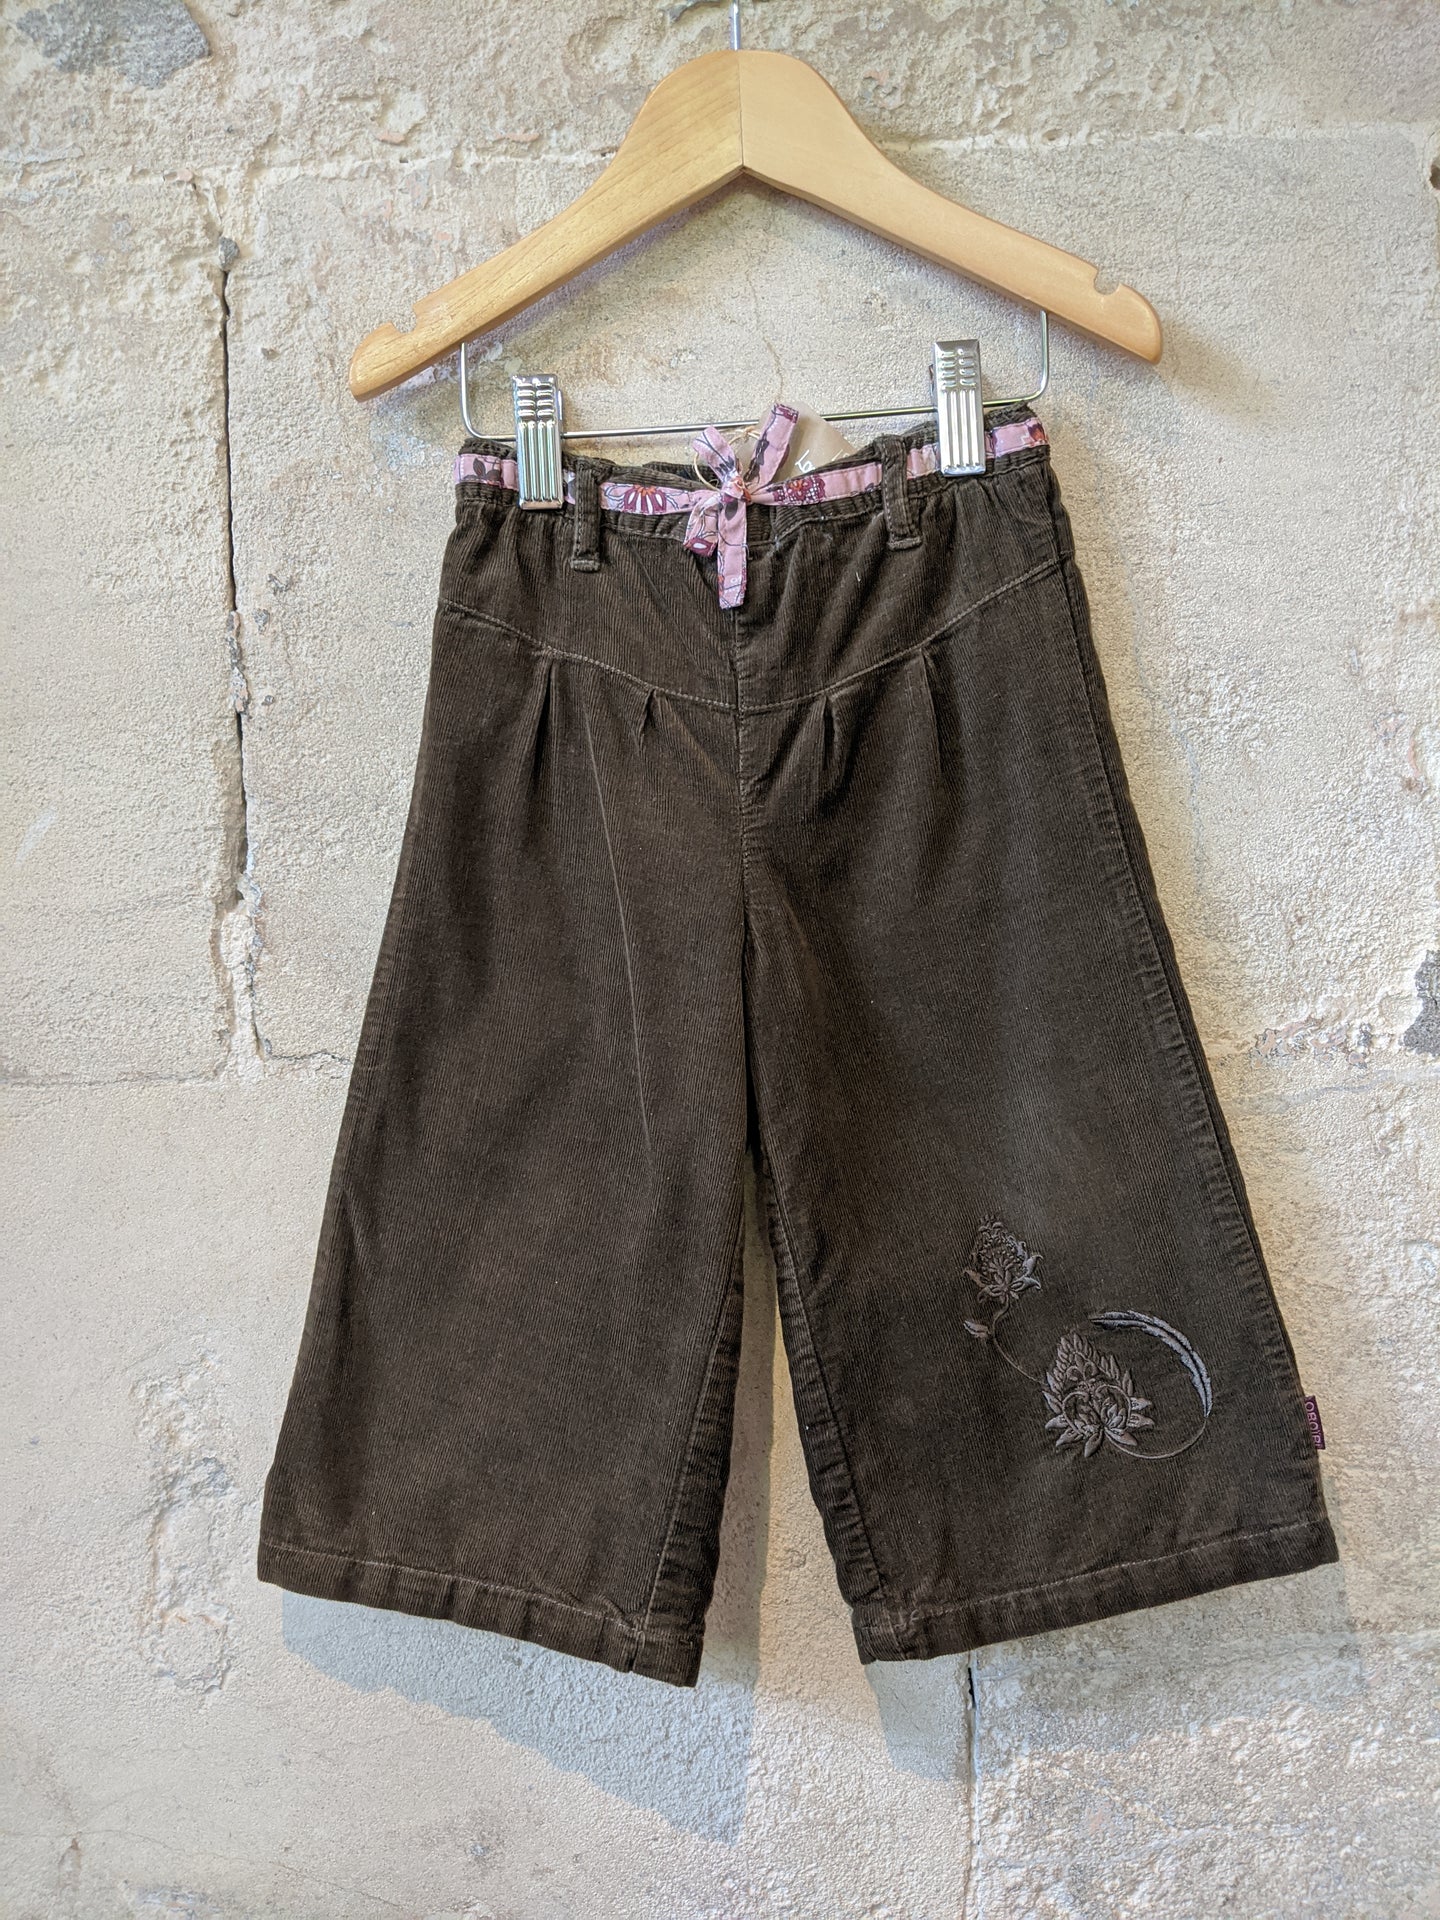 Lovely French Flared Cords Trousers - 18 Months